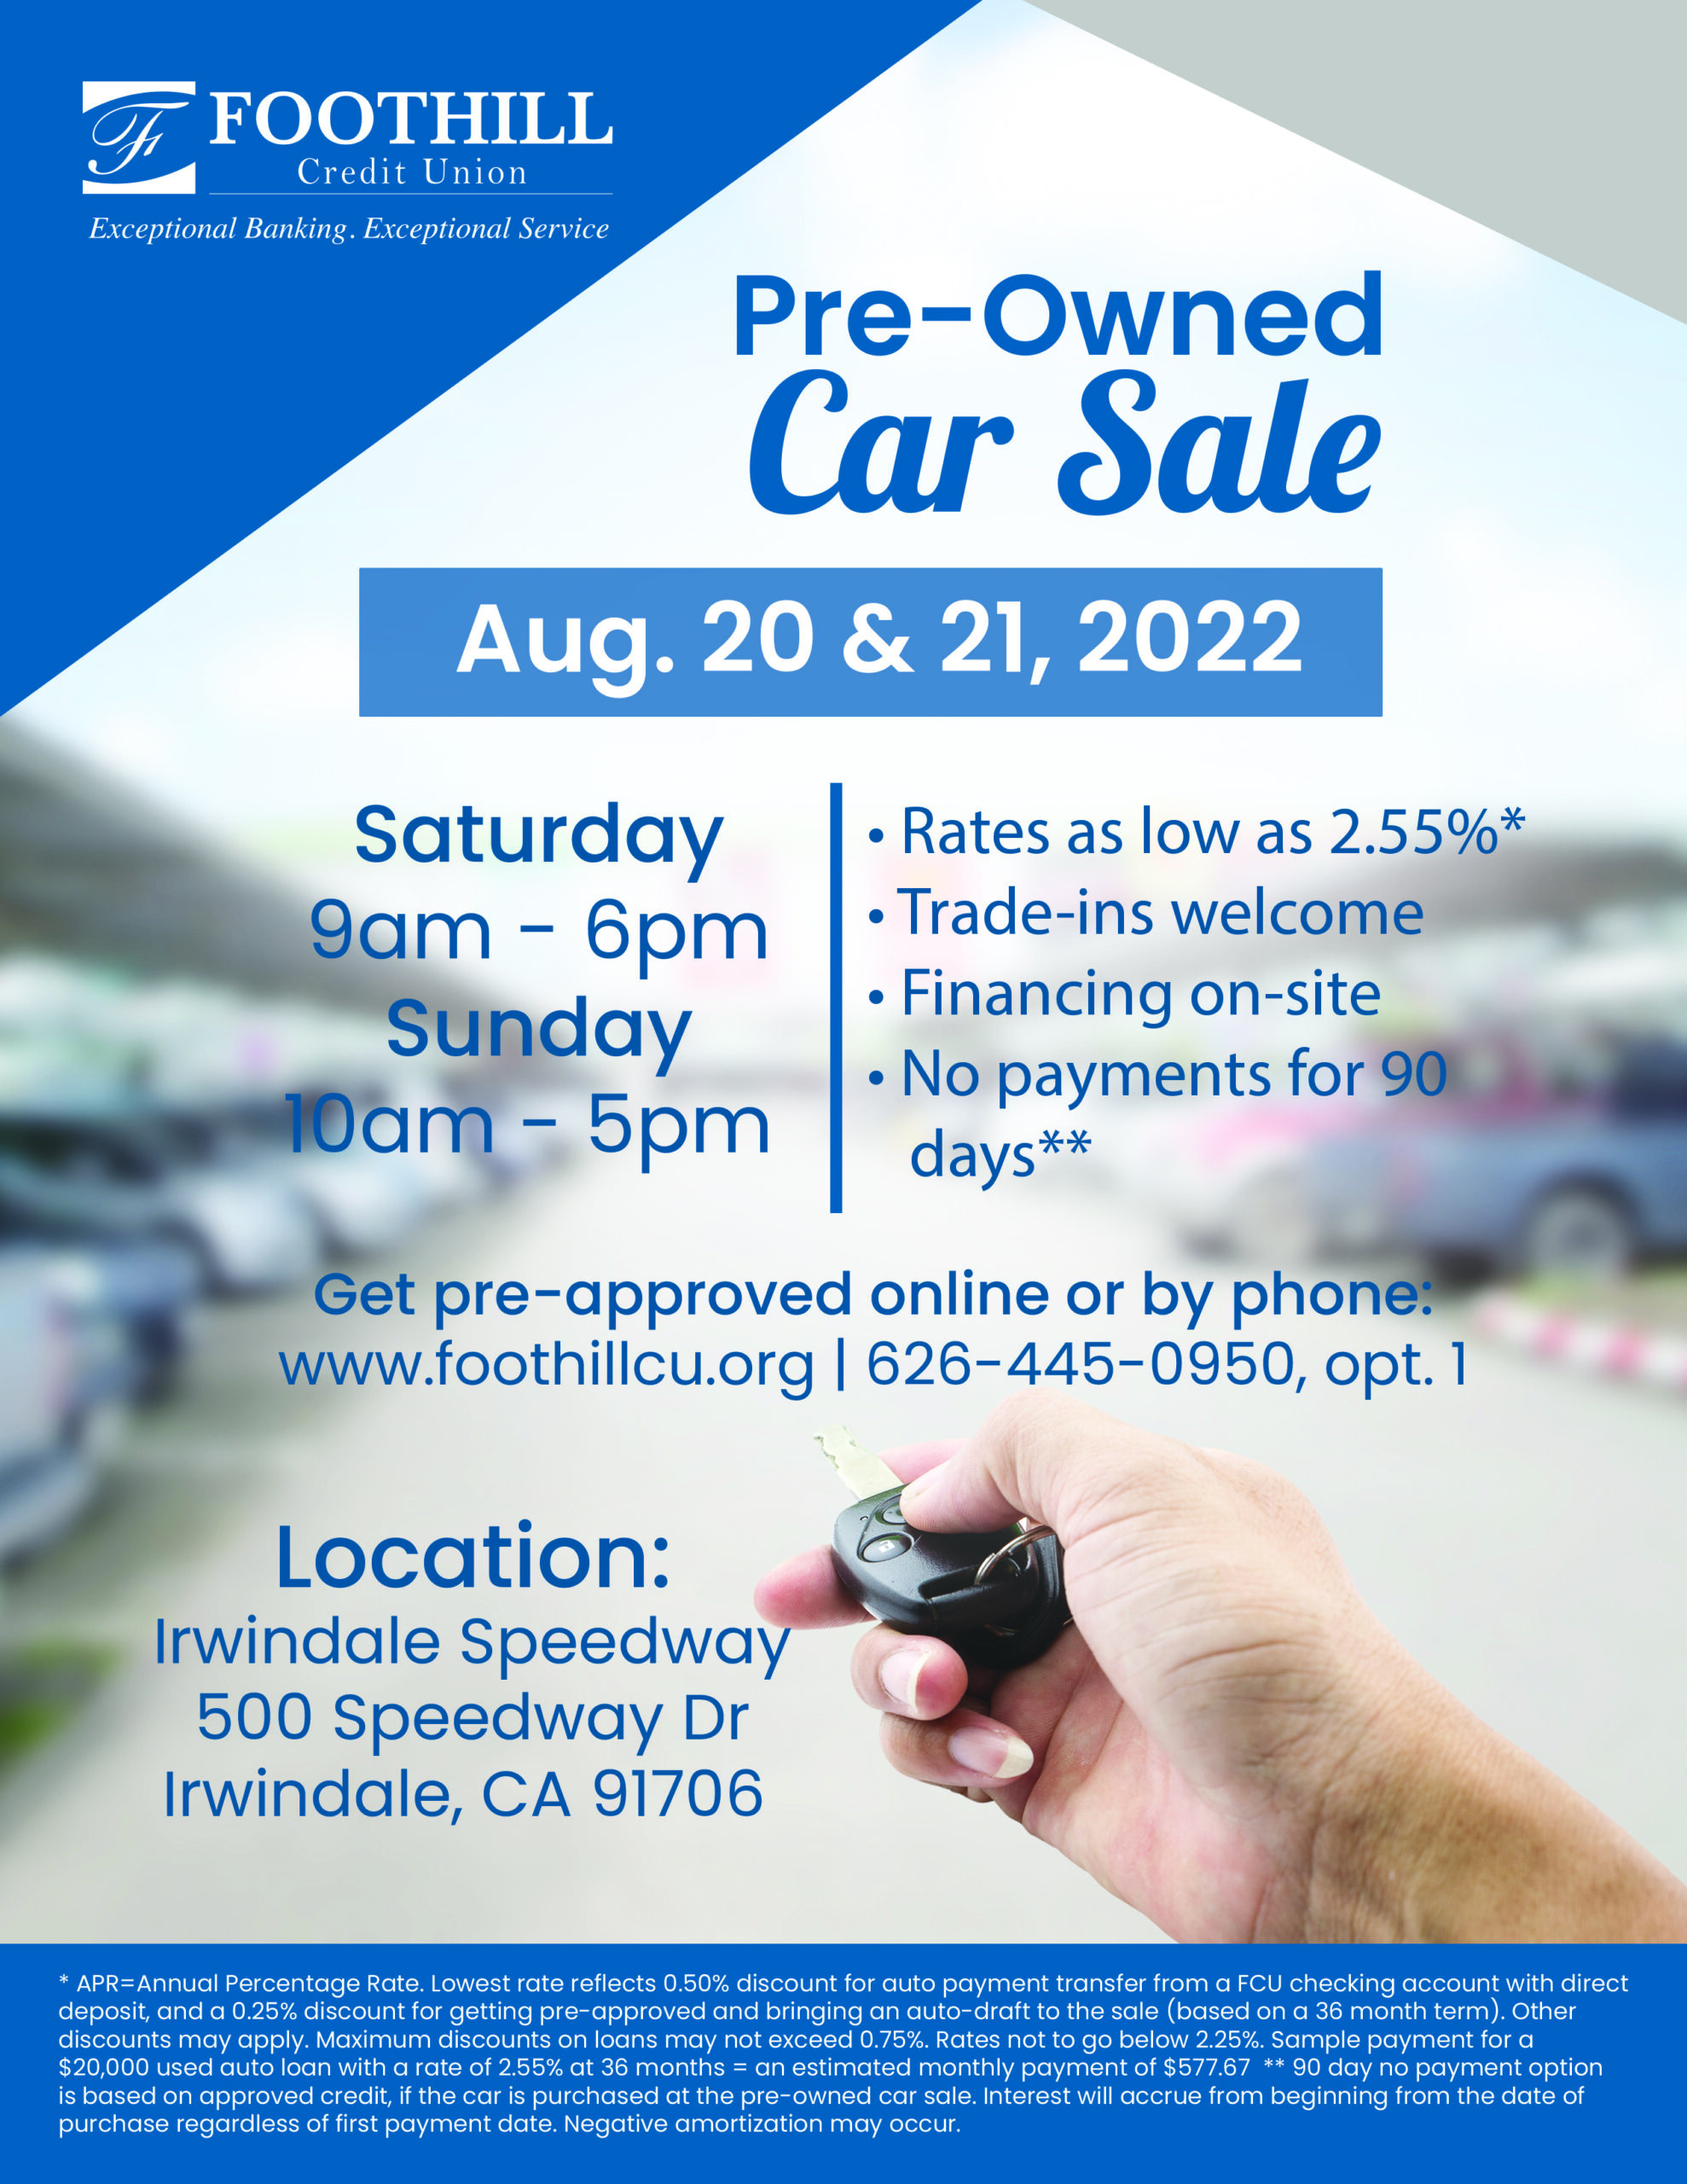 Foothill Credit Union pre-Owned Car Sale poster